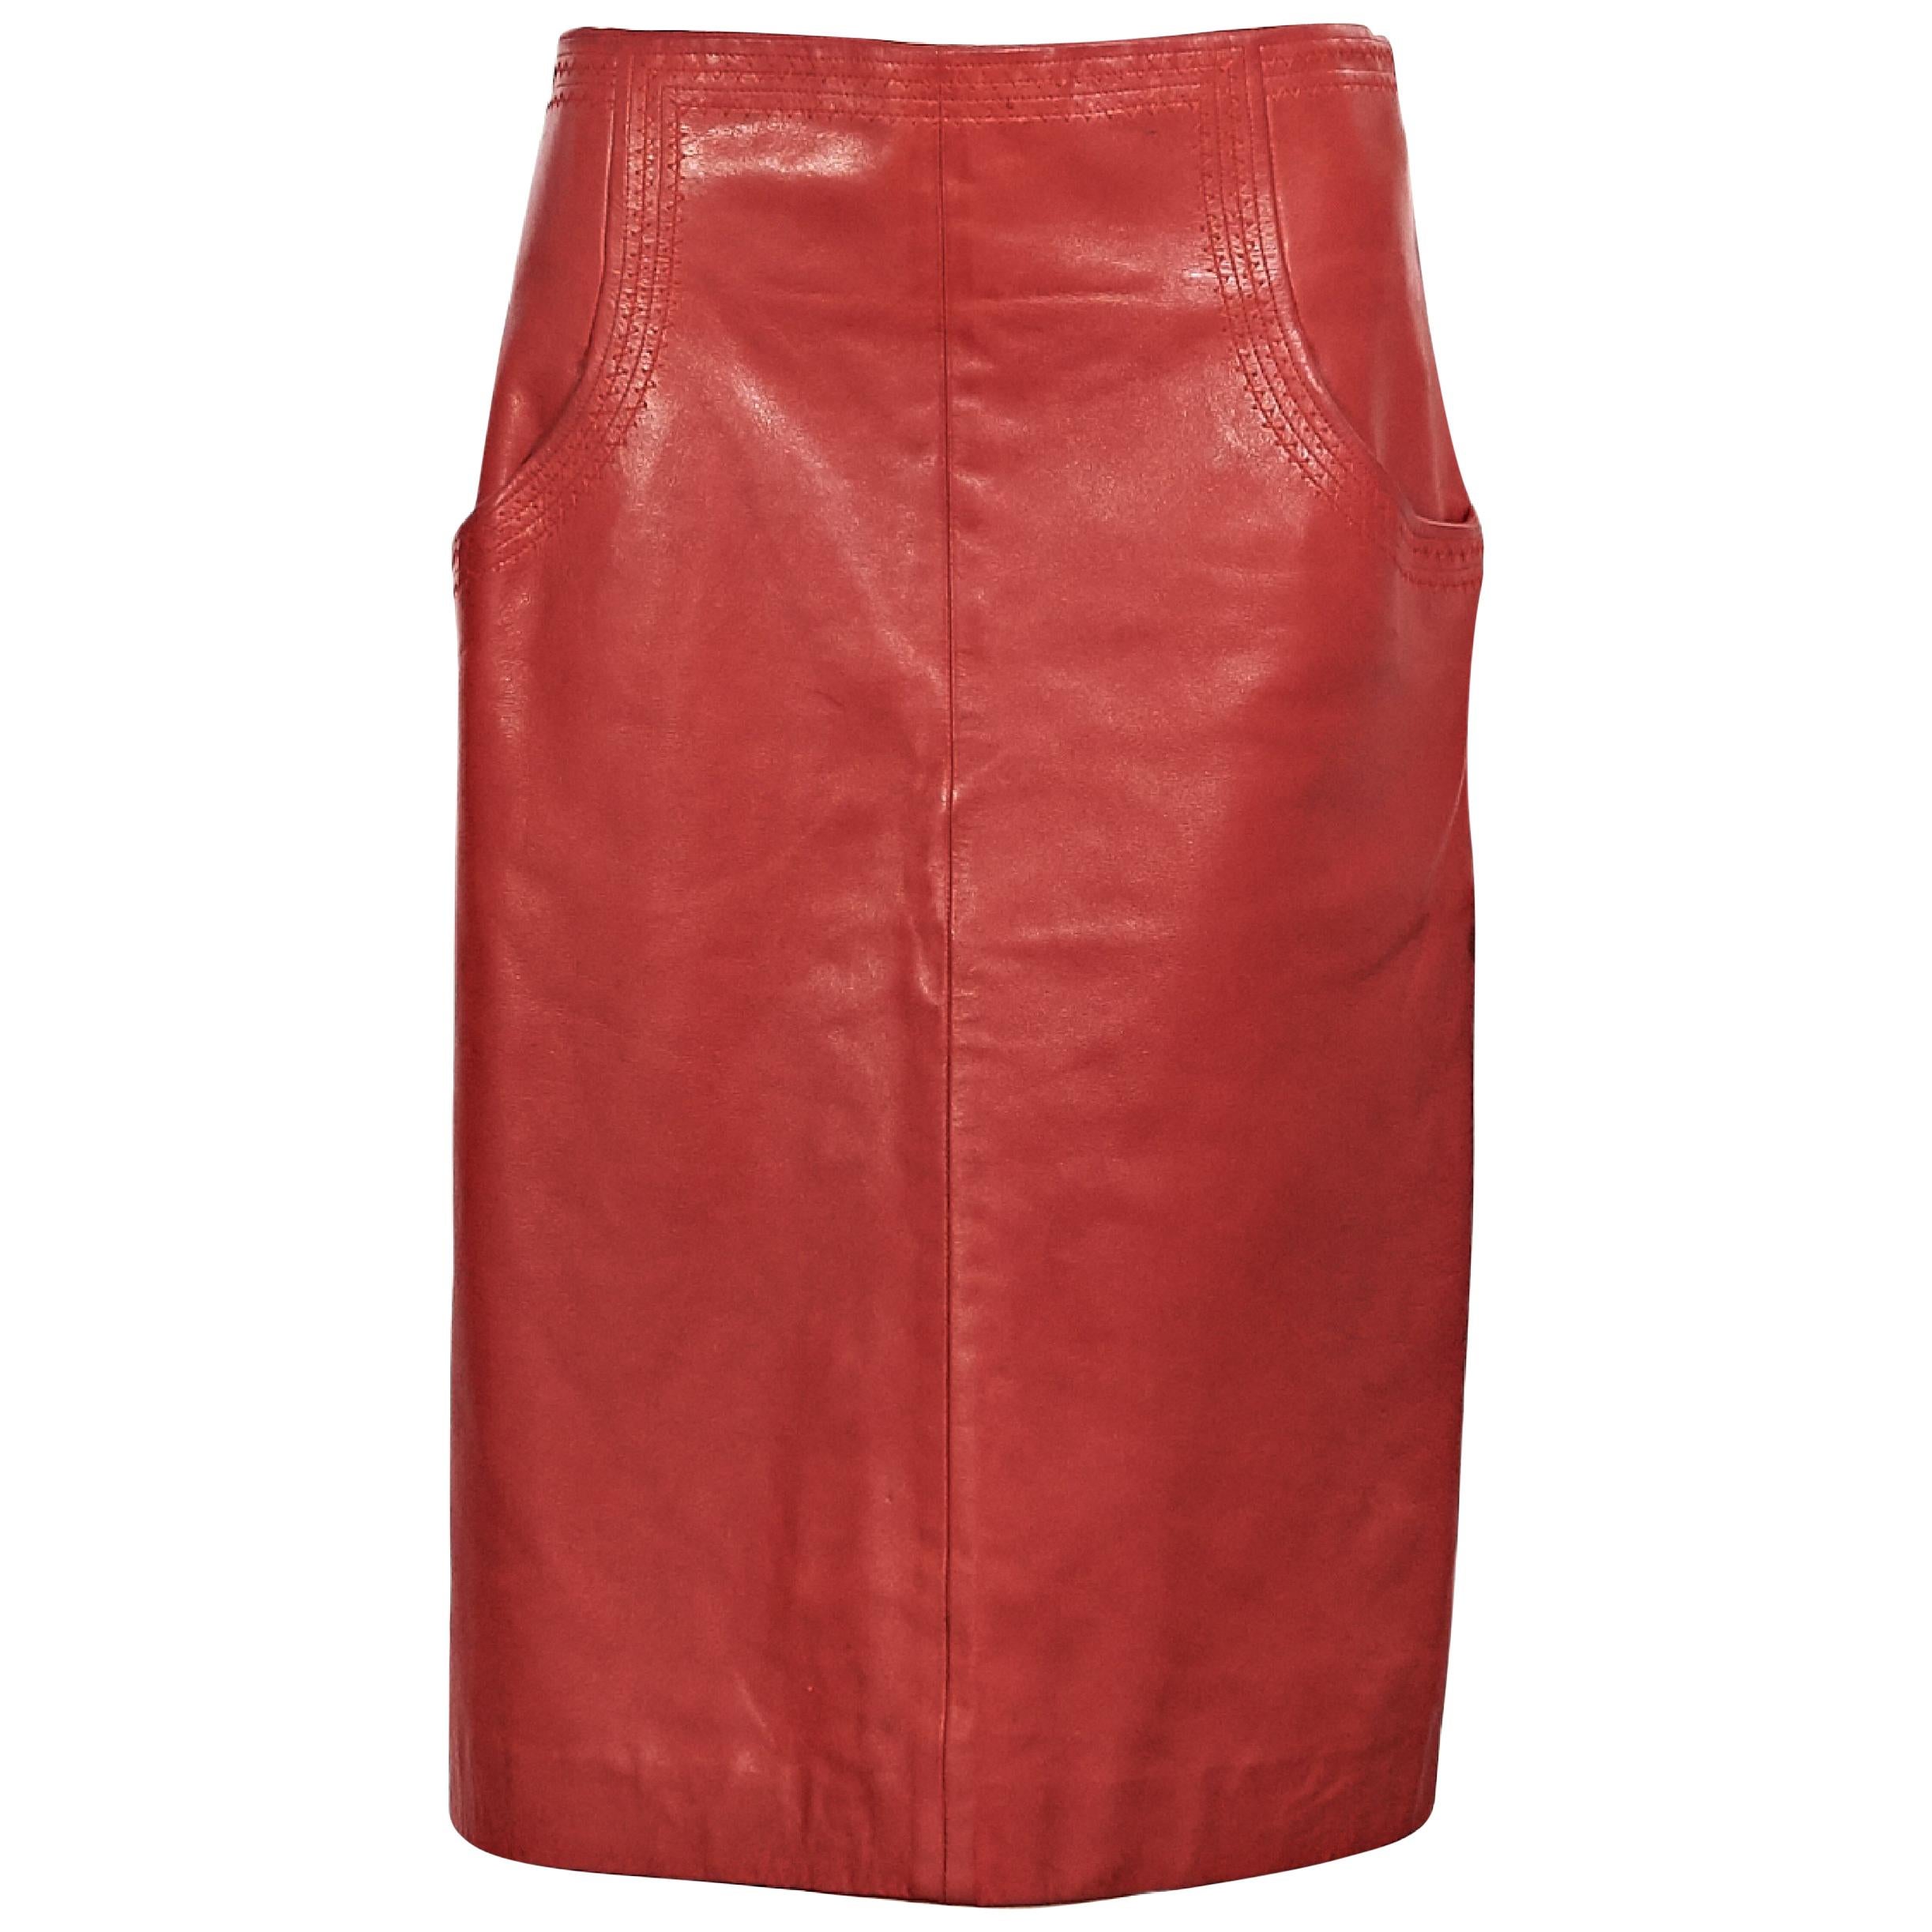 Red Vintage Chanel Leather Pencil Skirt